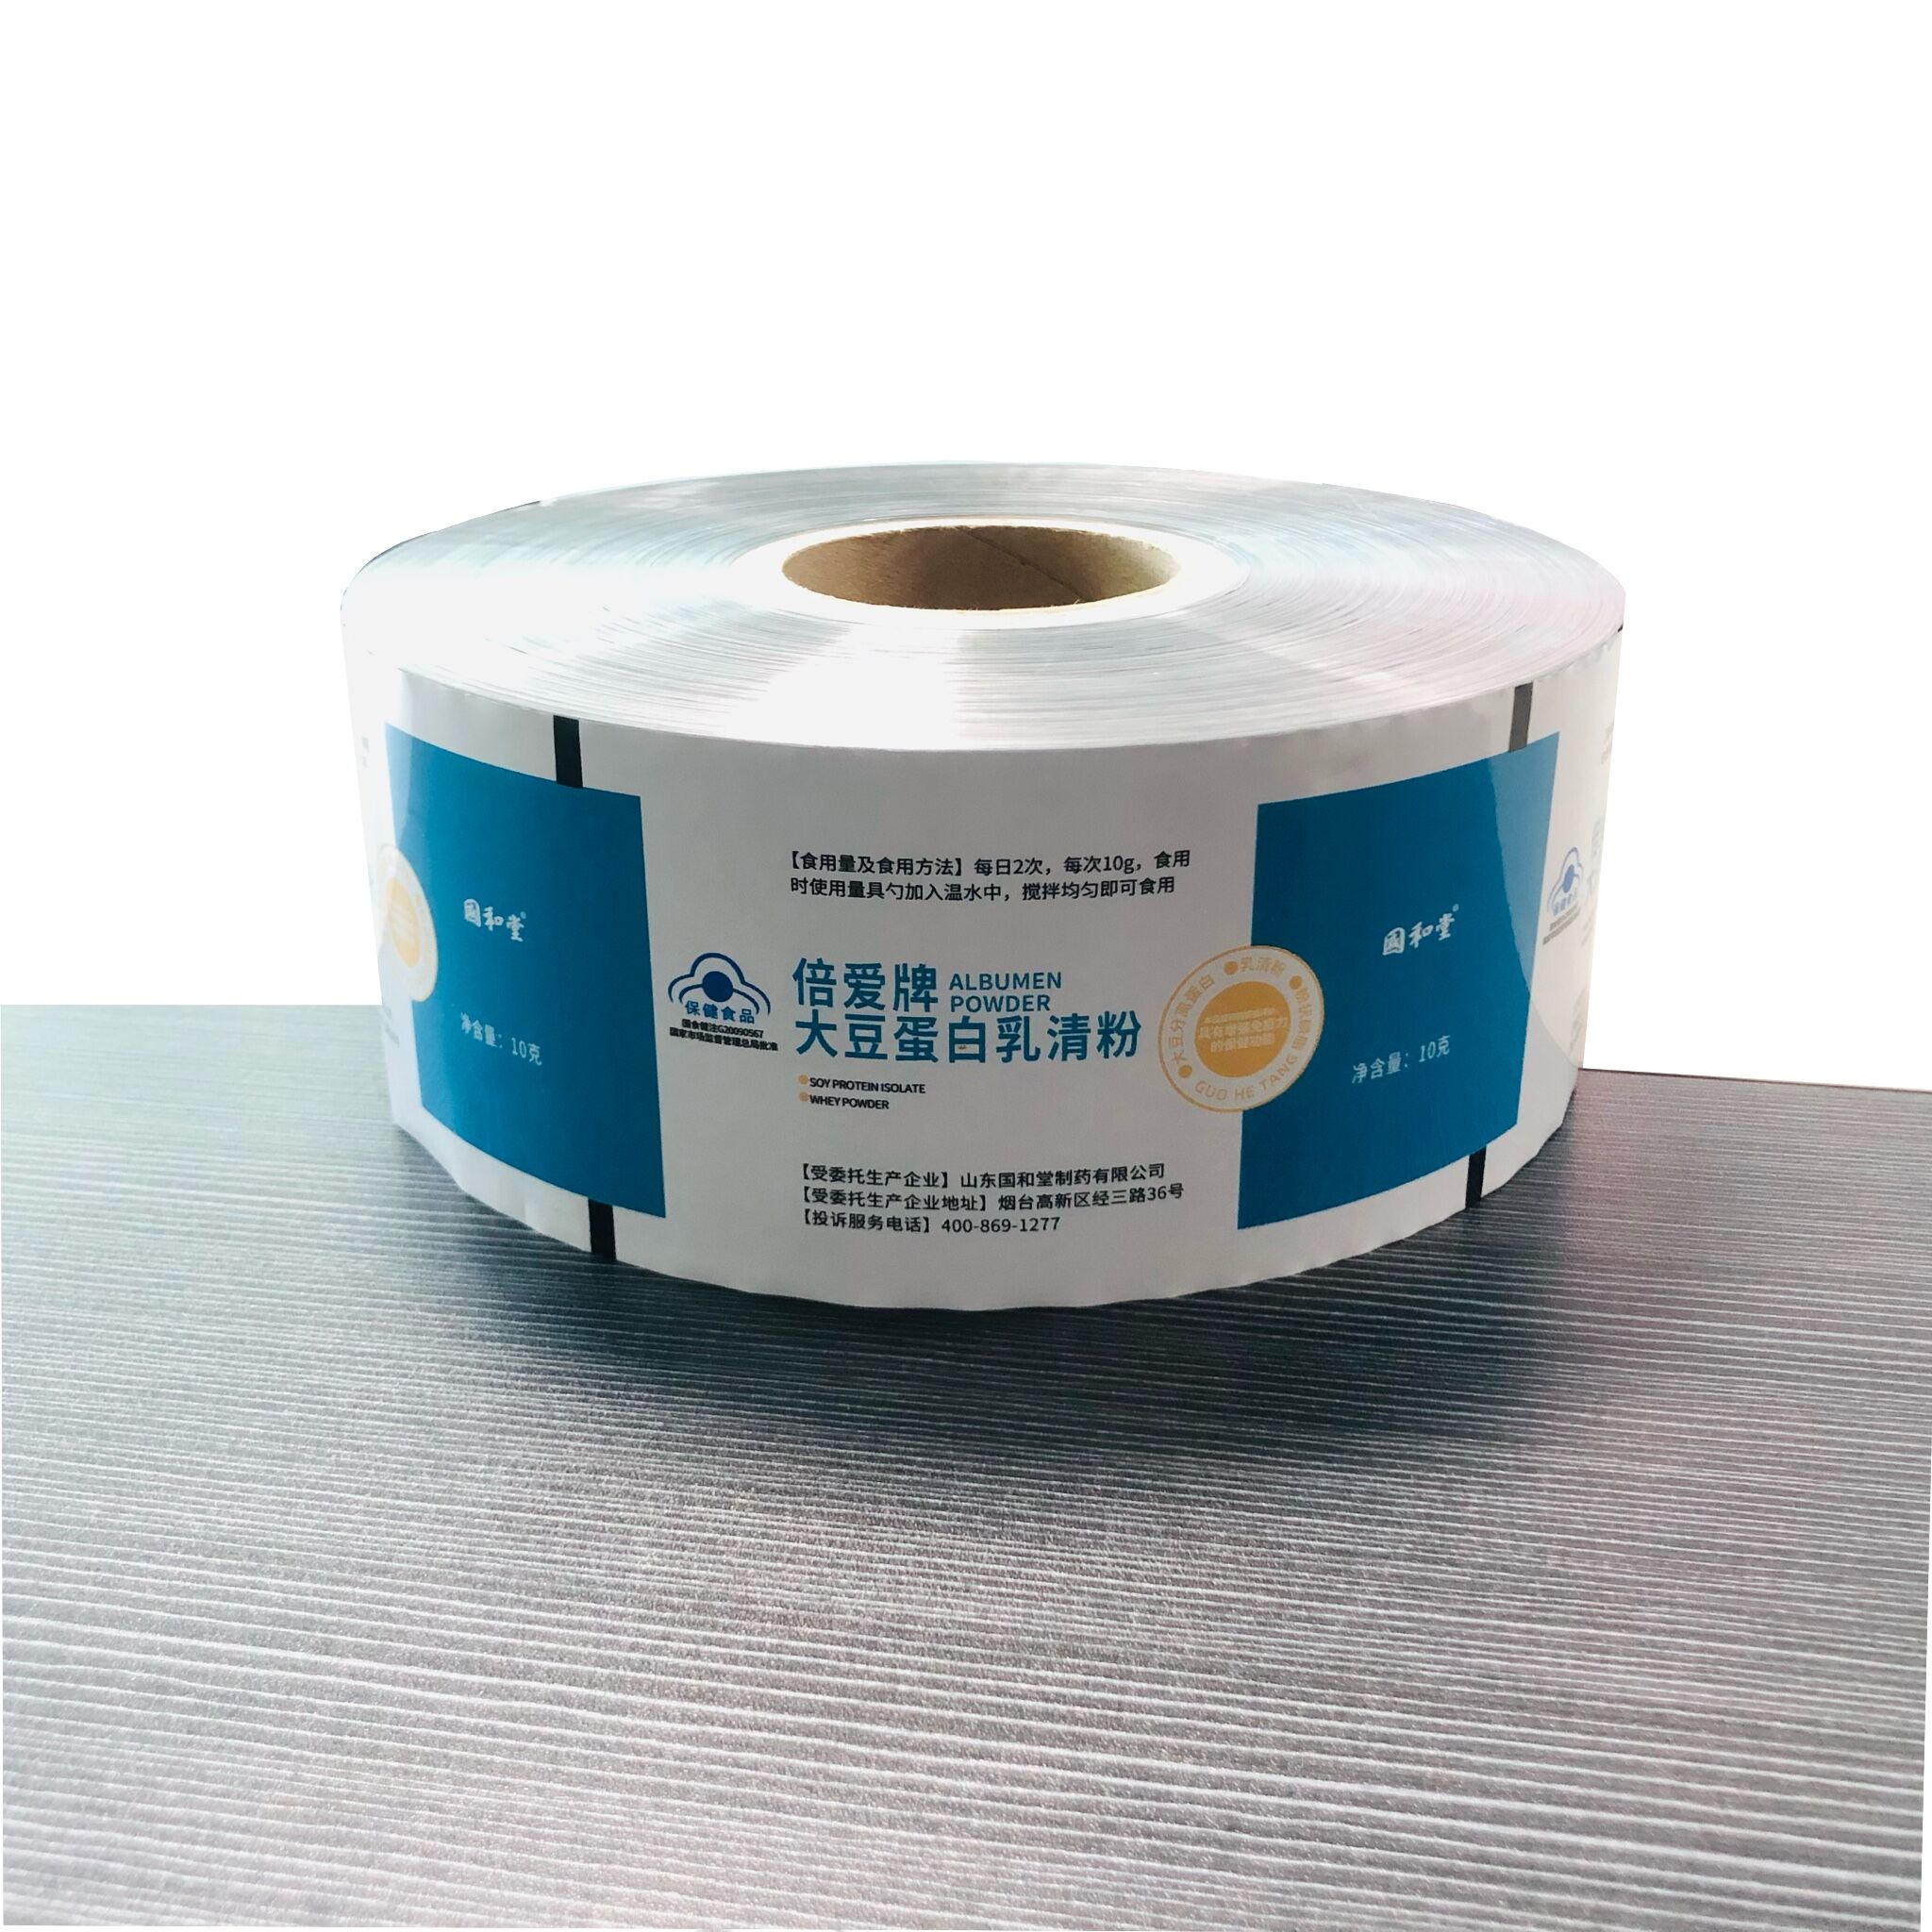 OEM/ODM China Aluminum Foil Plastic Film - Powder Product Packaging Composite Film Roll  – Meifeng Packaging